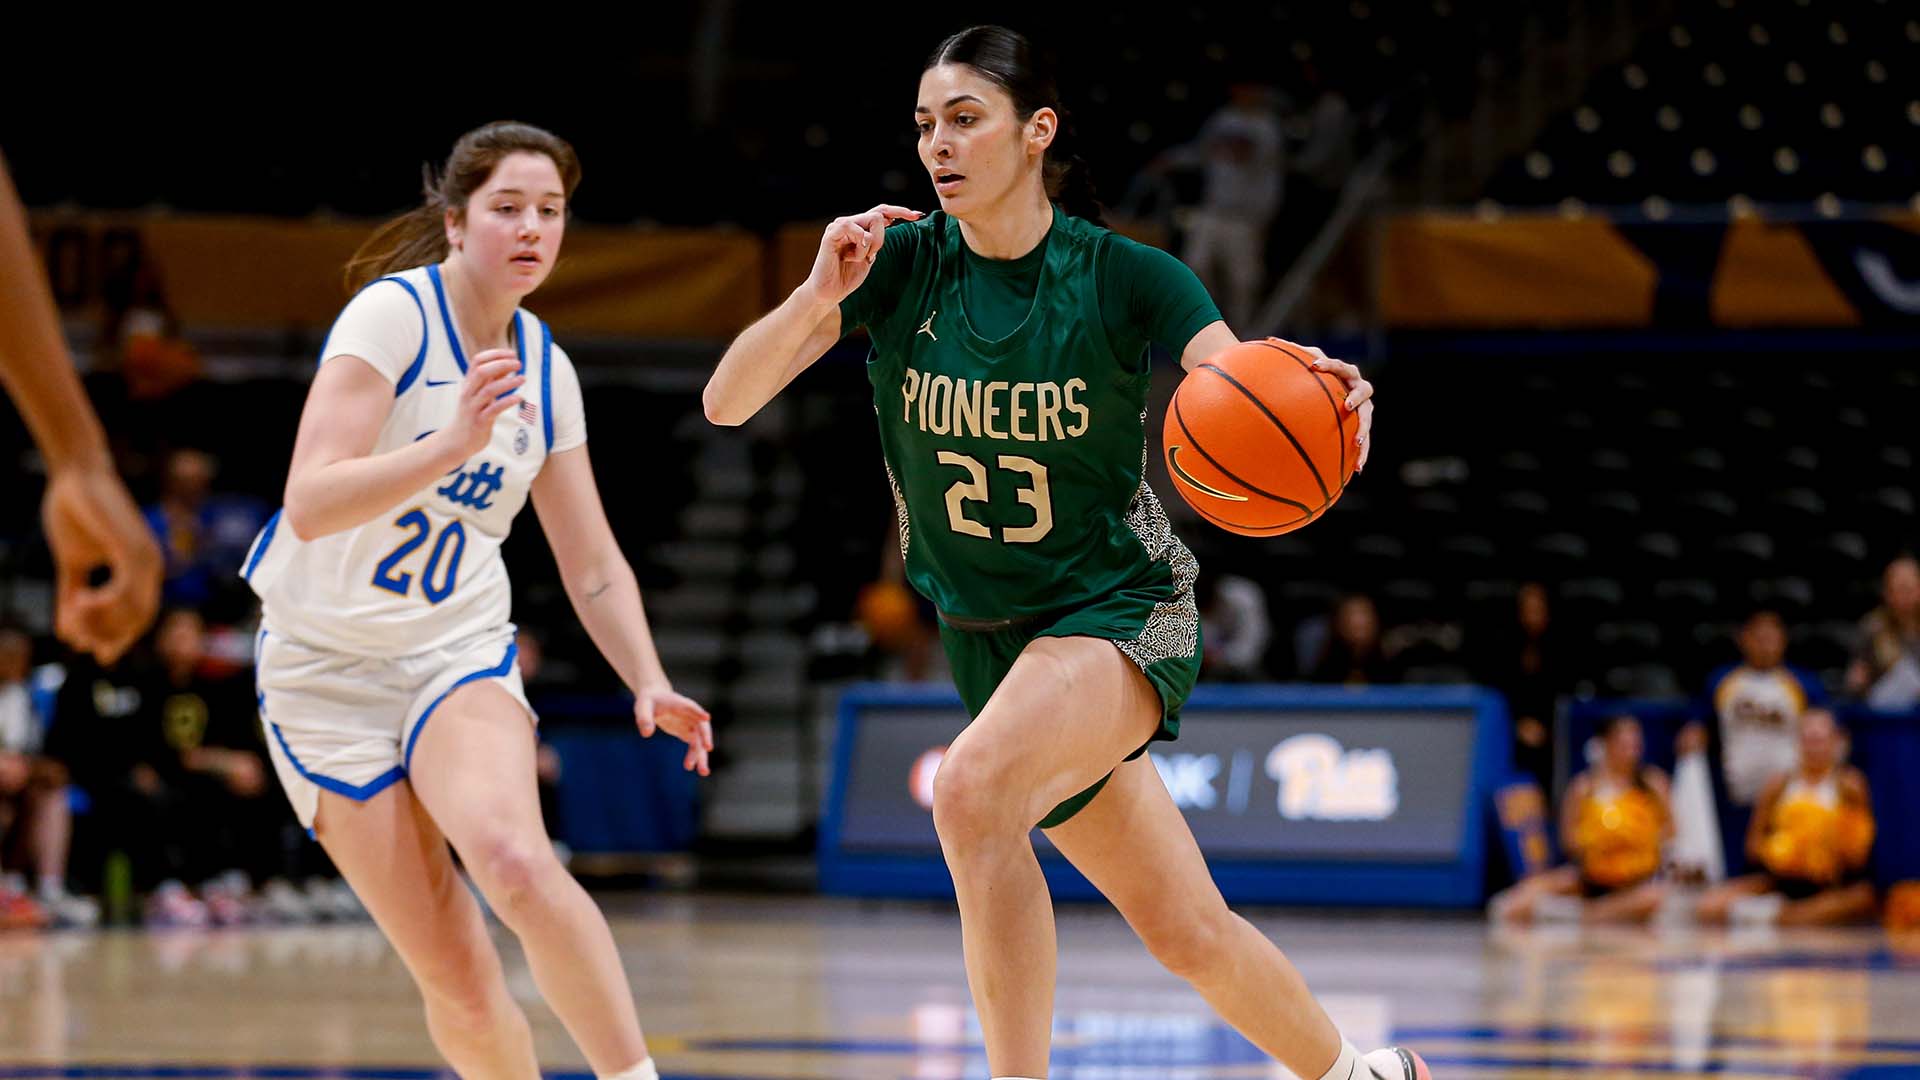 Piccolino selected for RSC Women's Basketball Player of the Week